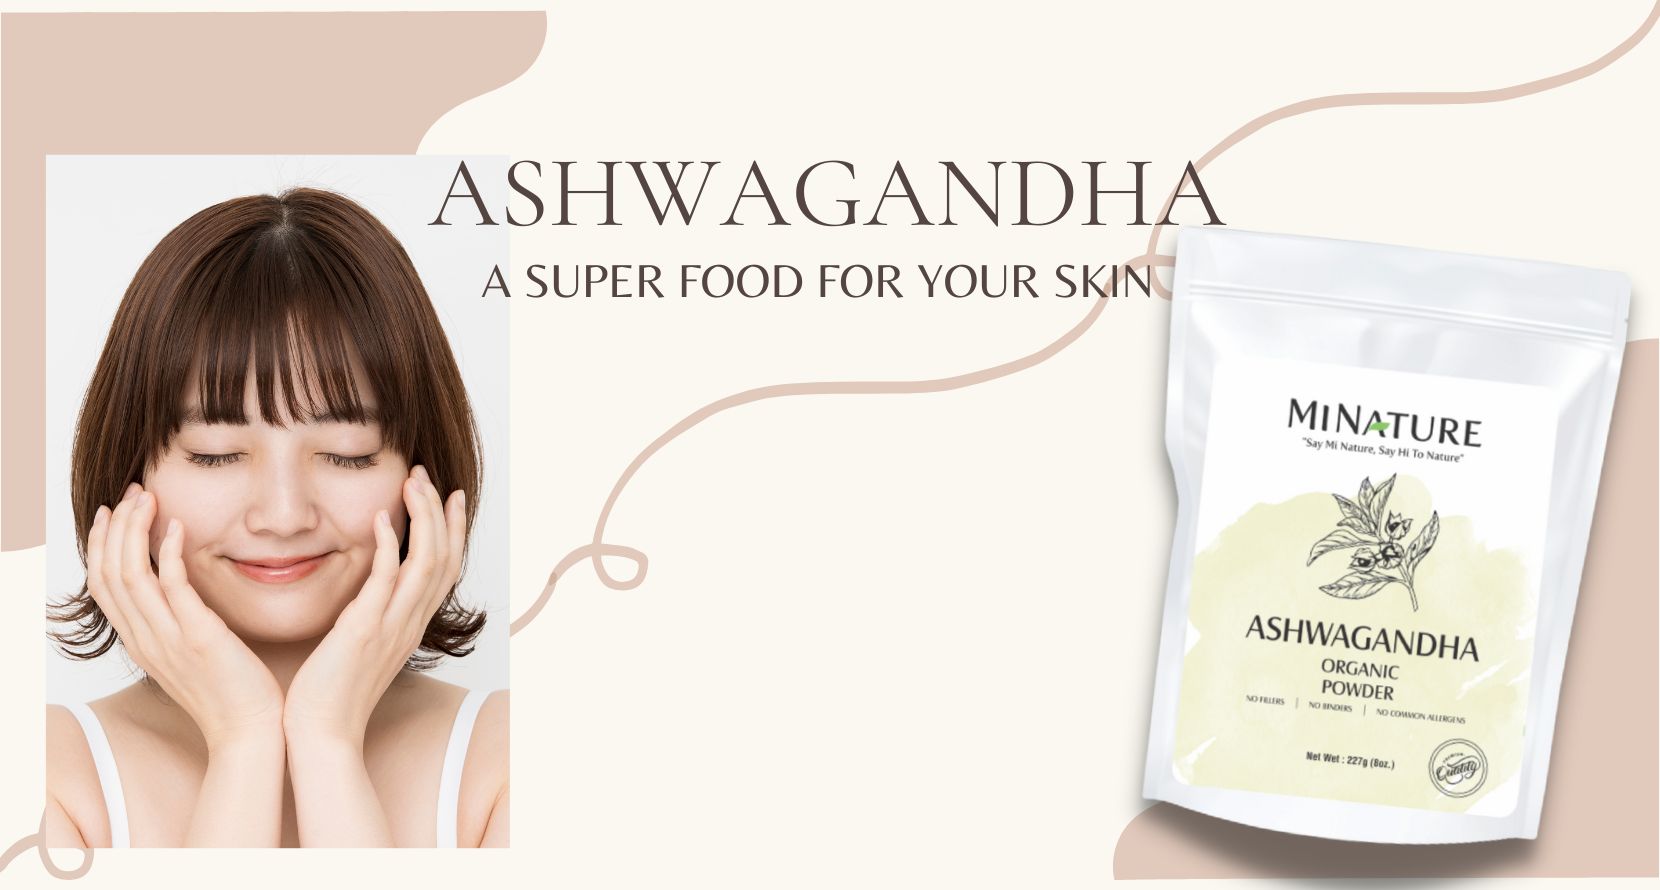 Ashwagandha – A Superfood for Your Skin